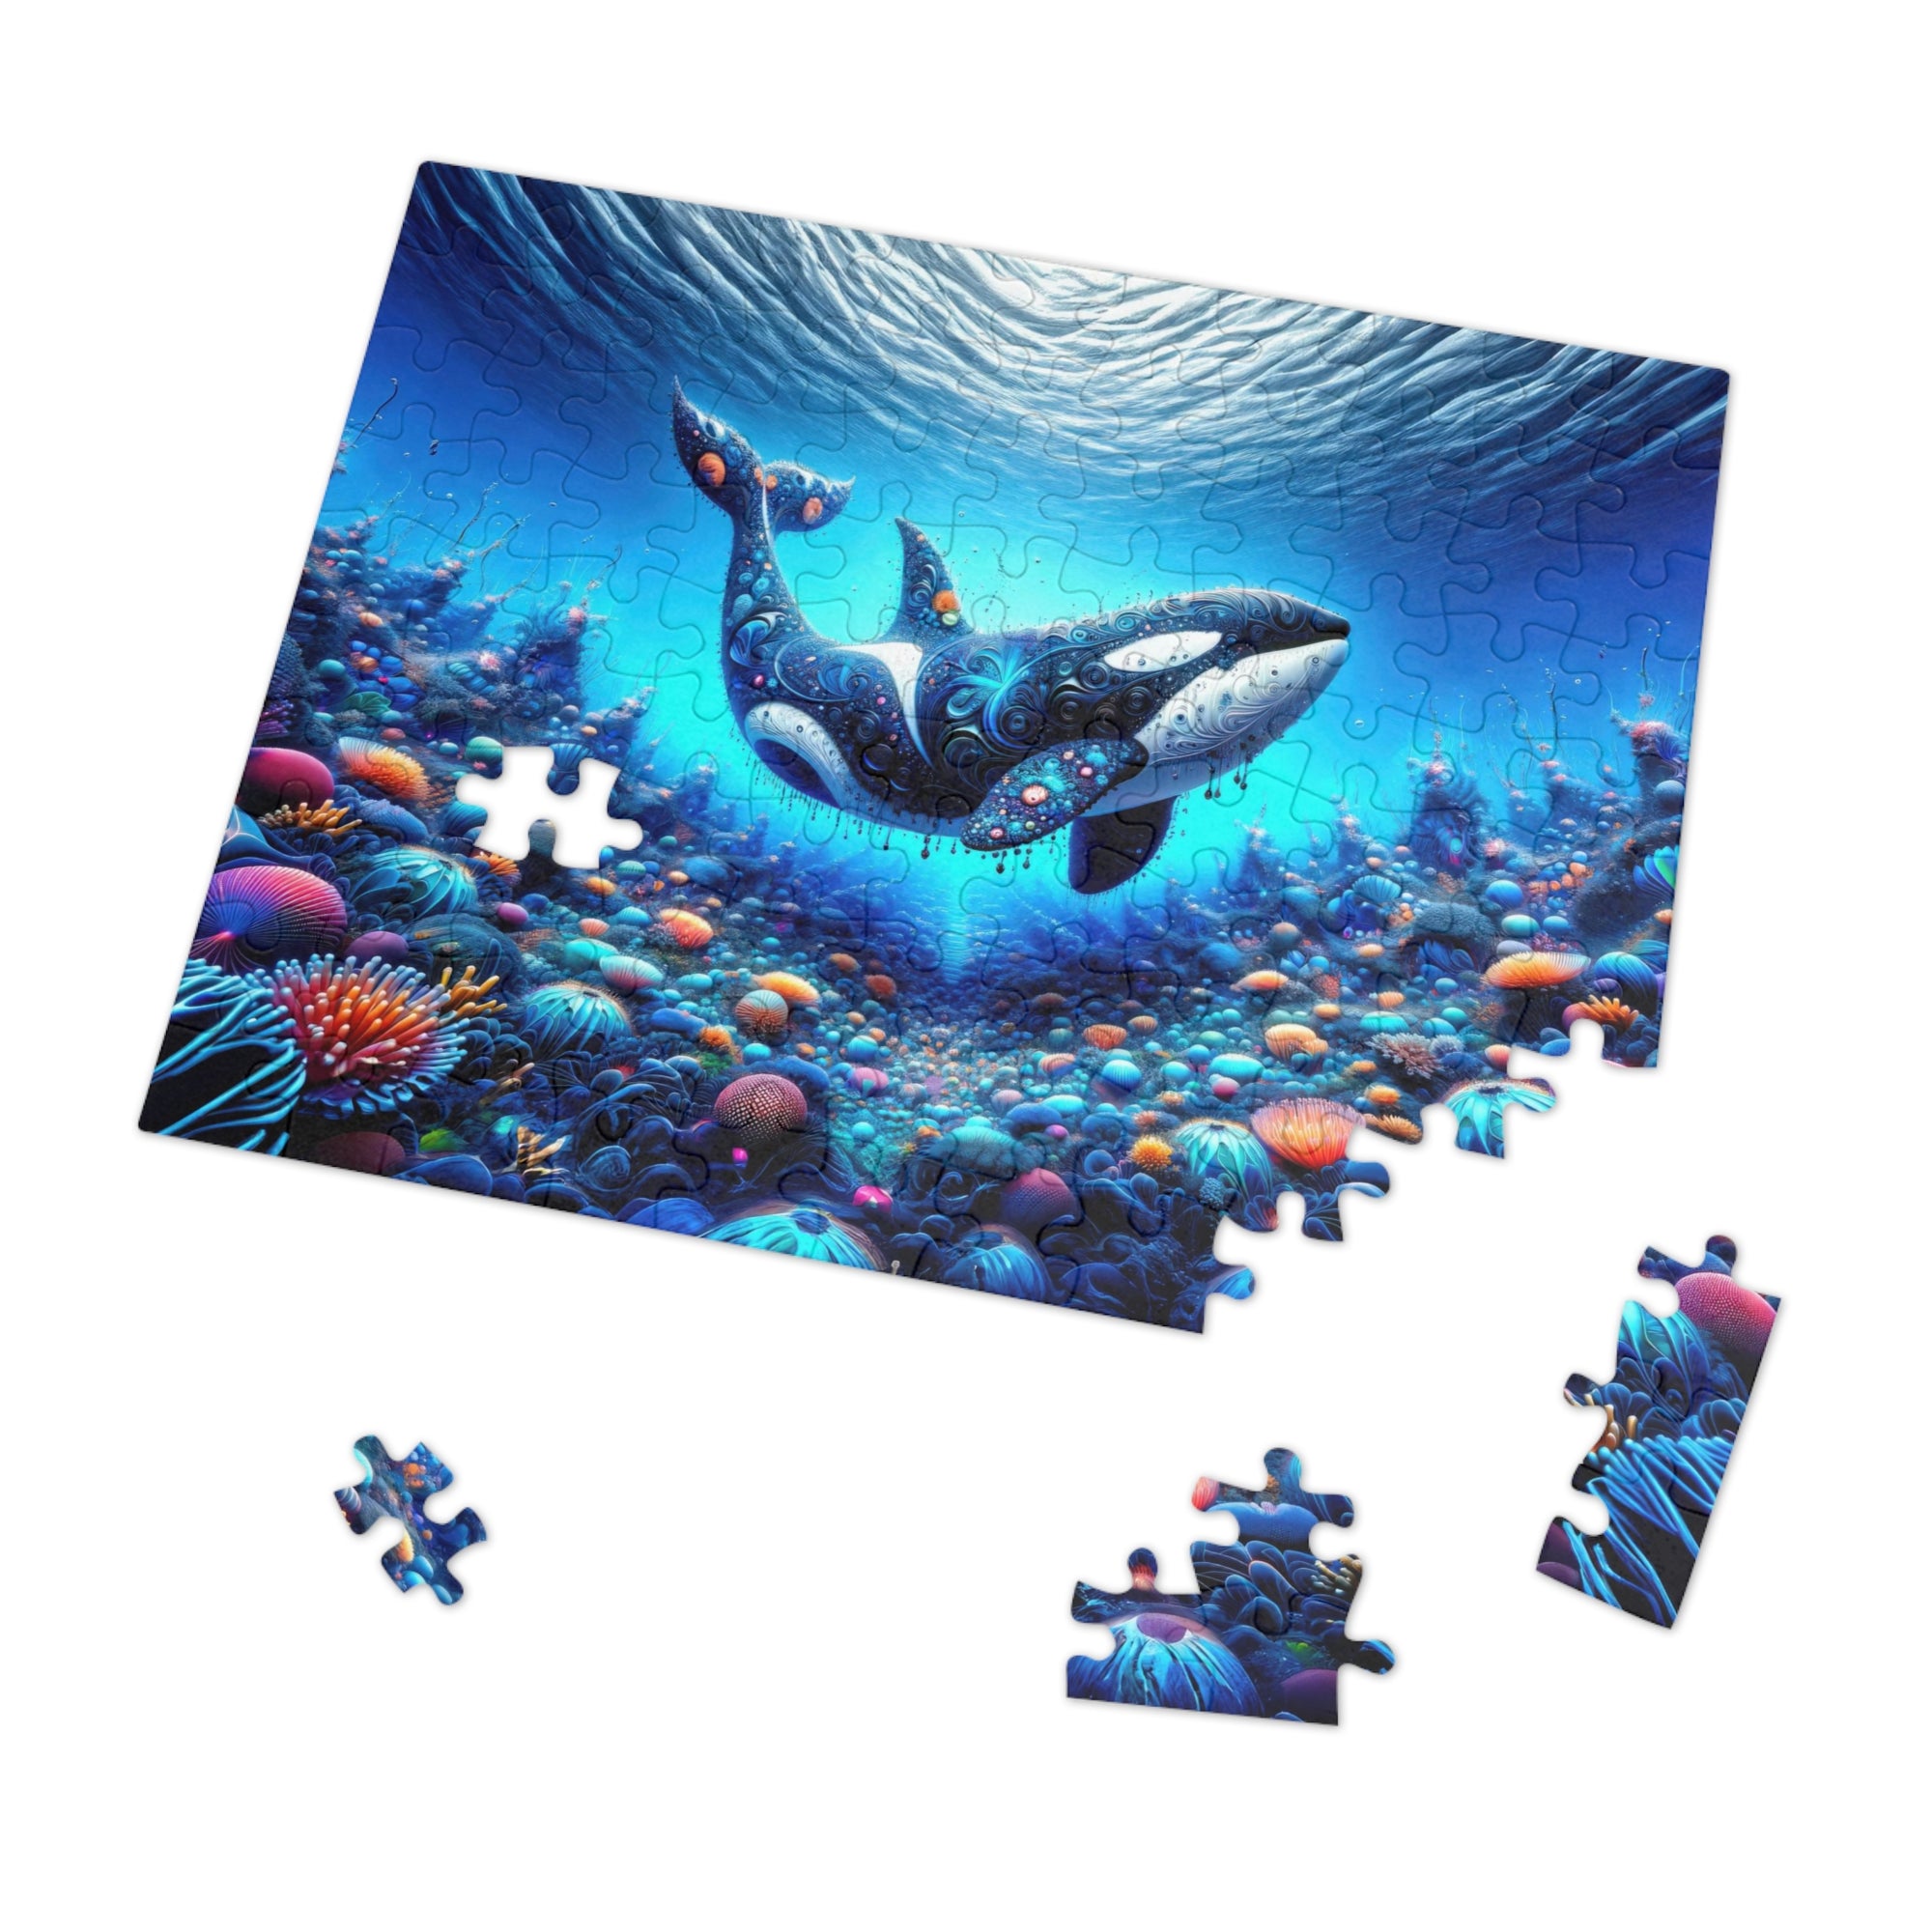 Whispers of the Whorled Waters Jigsaw Puzzle